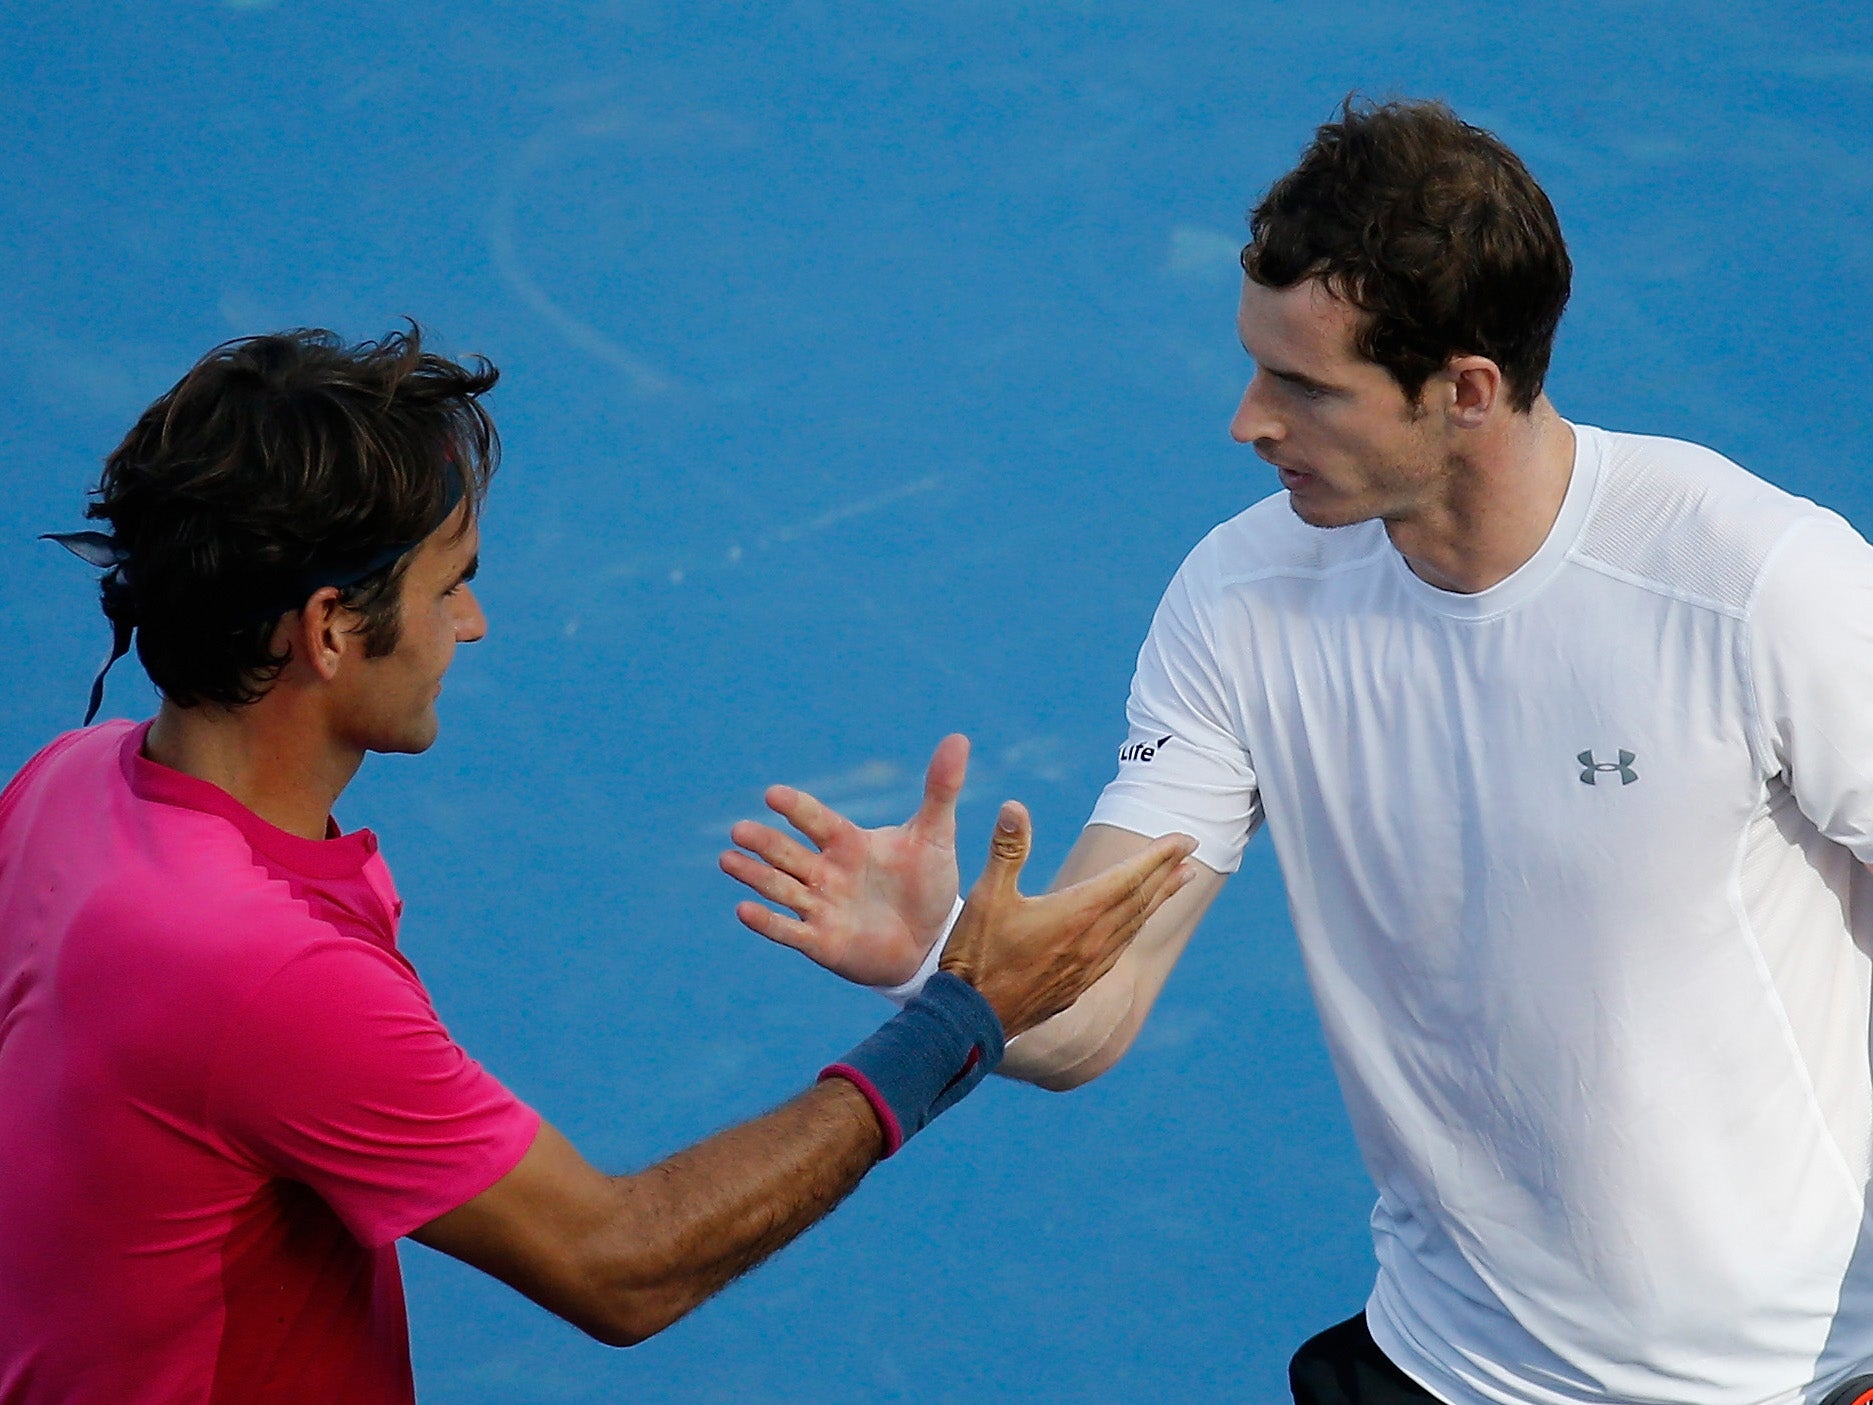 Murray has faced Federer in the Australian Open, US Open, Wimbledon and Olympic finals